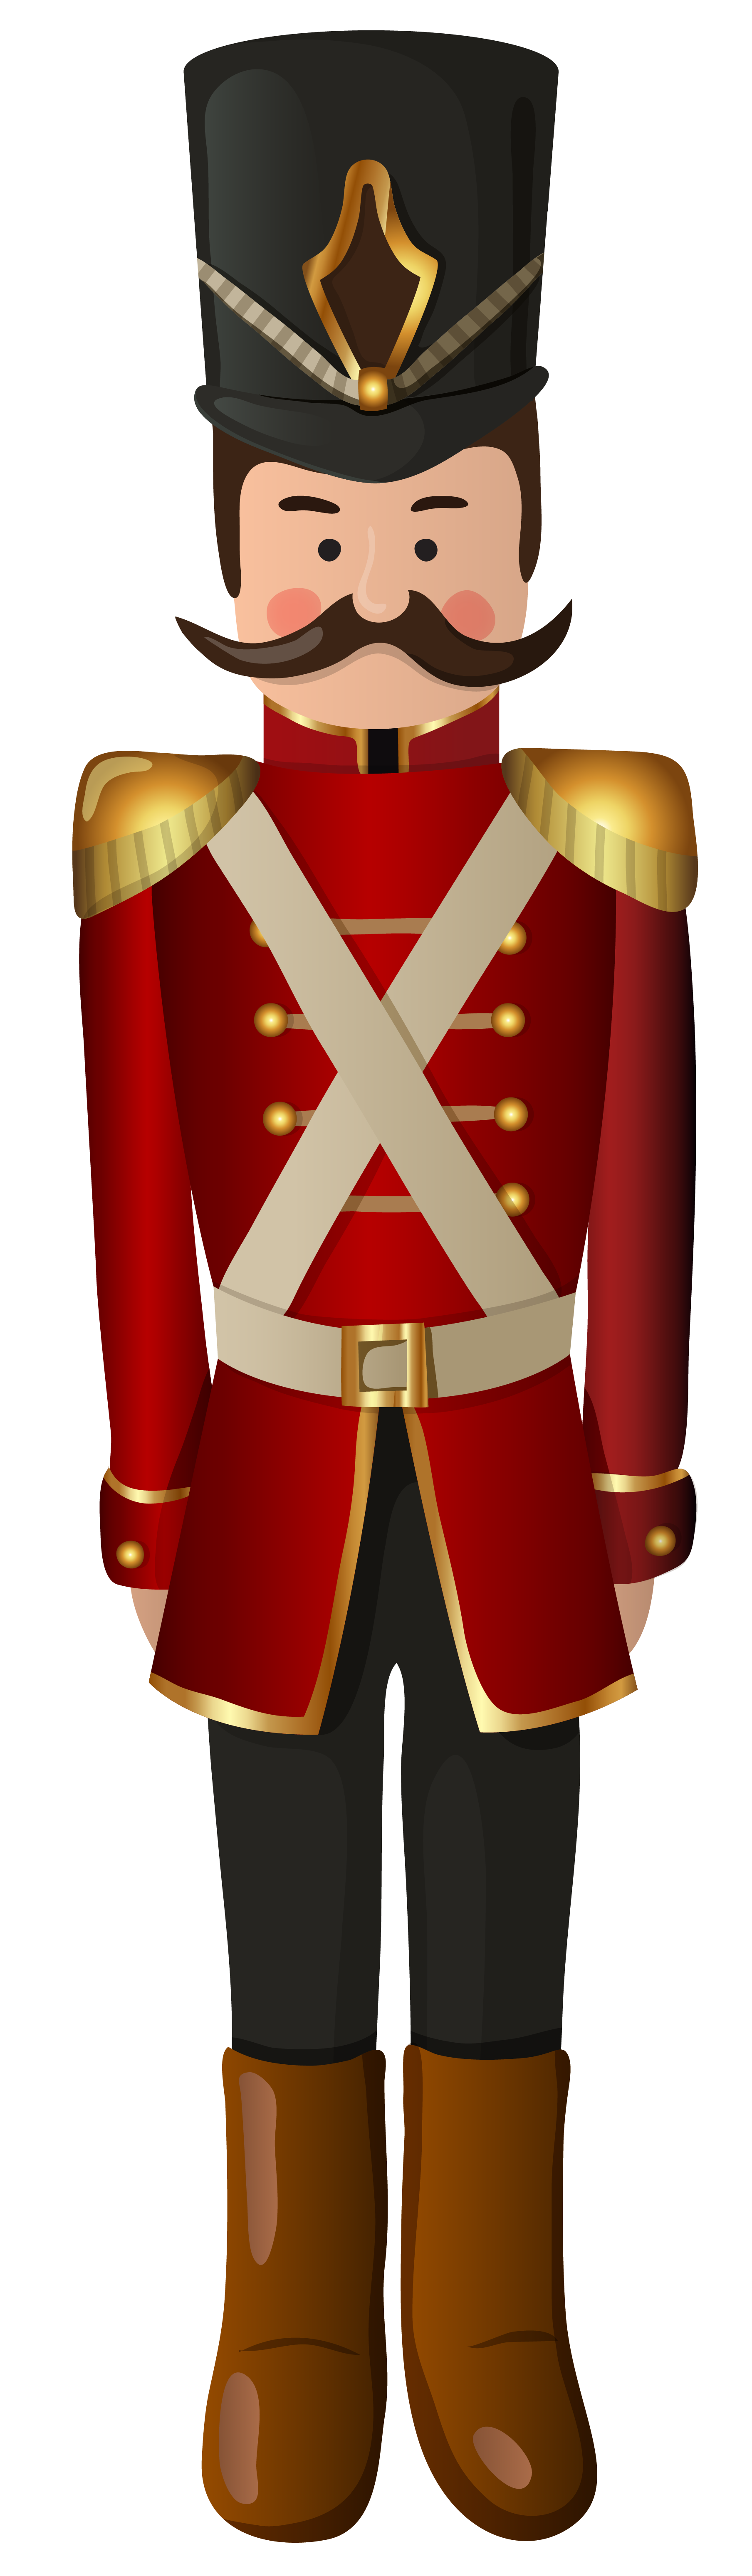 Nutcracker Clipart Free Cliparts And Png Nutcracker Clipart | Images ...